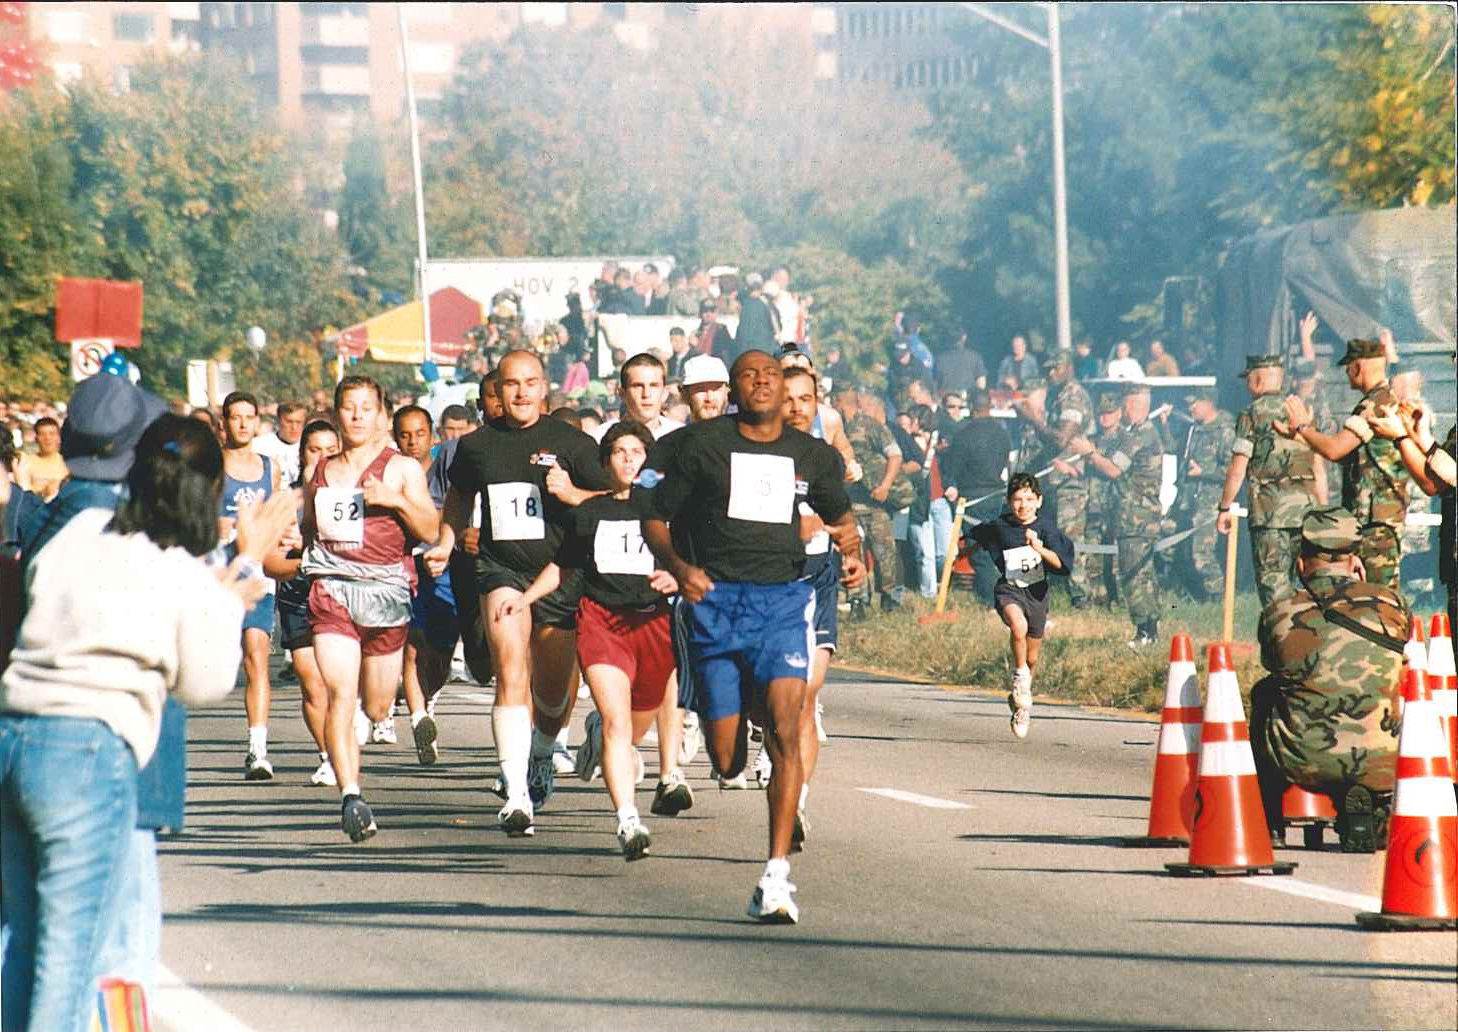 A group of runners in the Marine Corps Marathon. Year not known. (Courtesy Marine Corps Marathon)